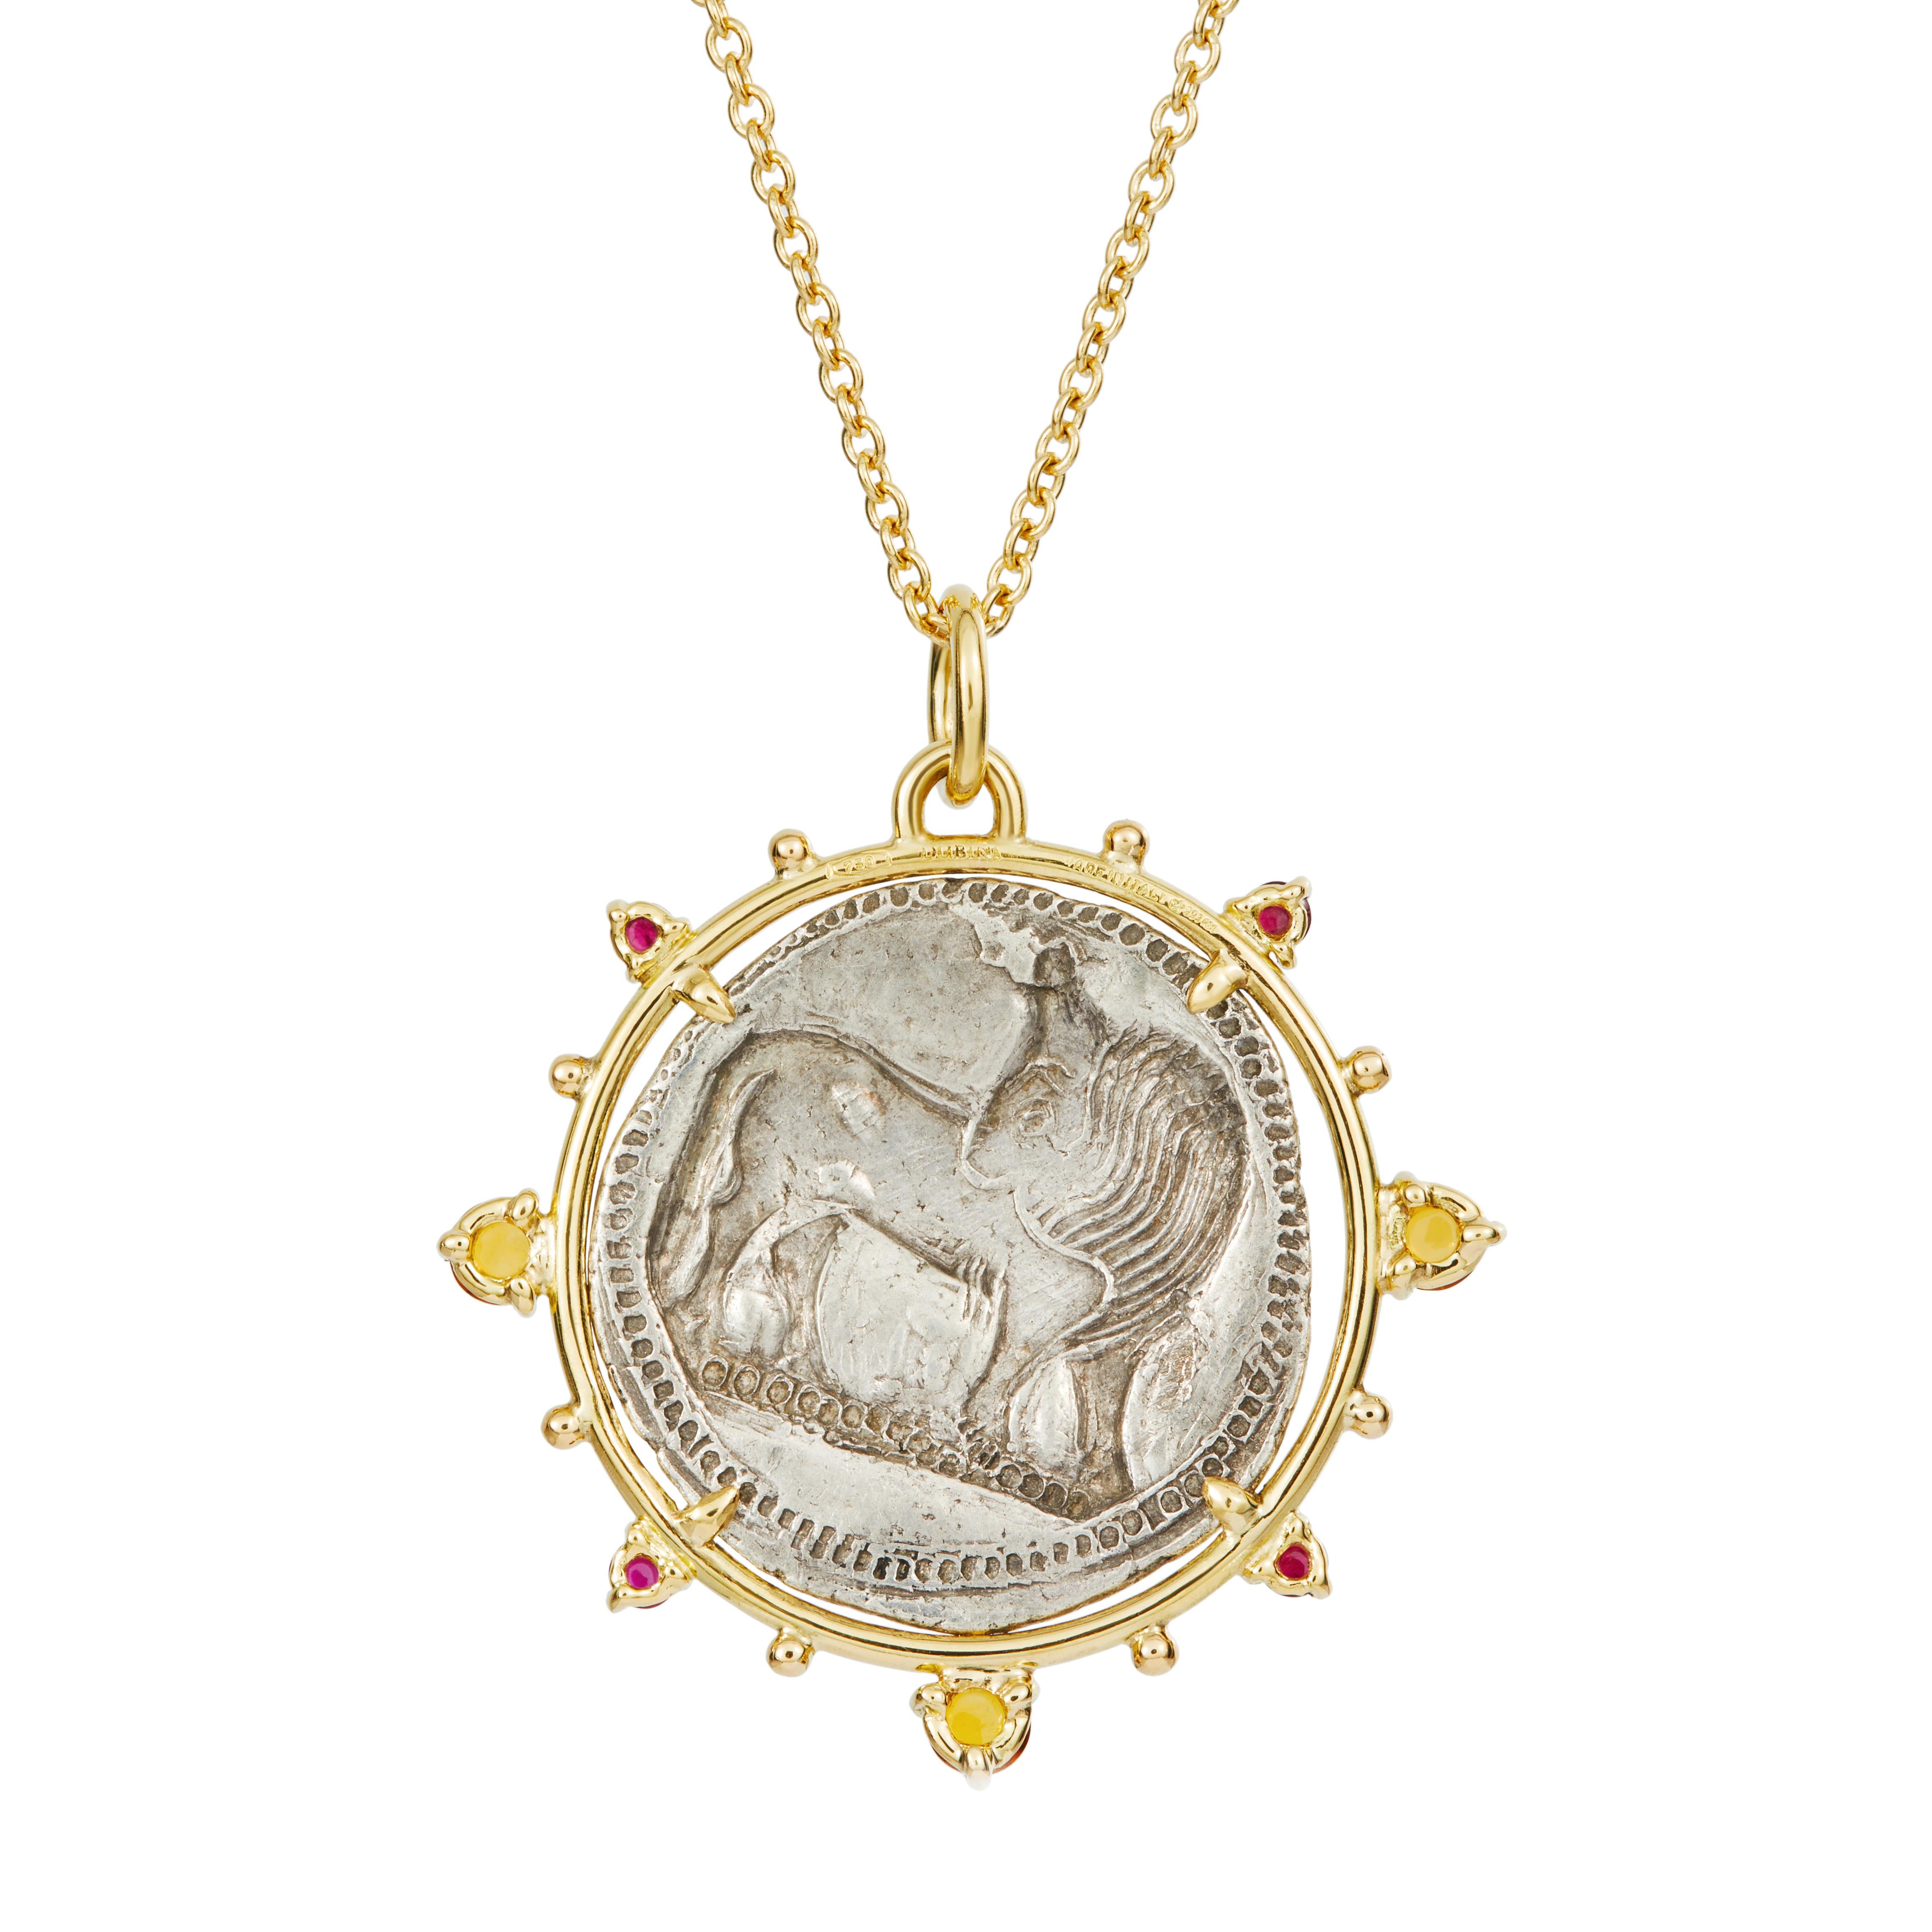 This DUBINI coin necklace from the 'Empires' collection features authentic silver coin minted in Lucania circa 530-510 B.C. set in 18K gold with ruby and citrine cabochons.

DEPICTED ON THE COIN
Obverse: Bull standing left, head right; VM in